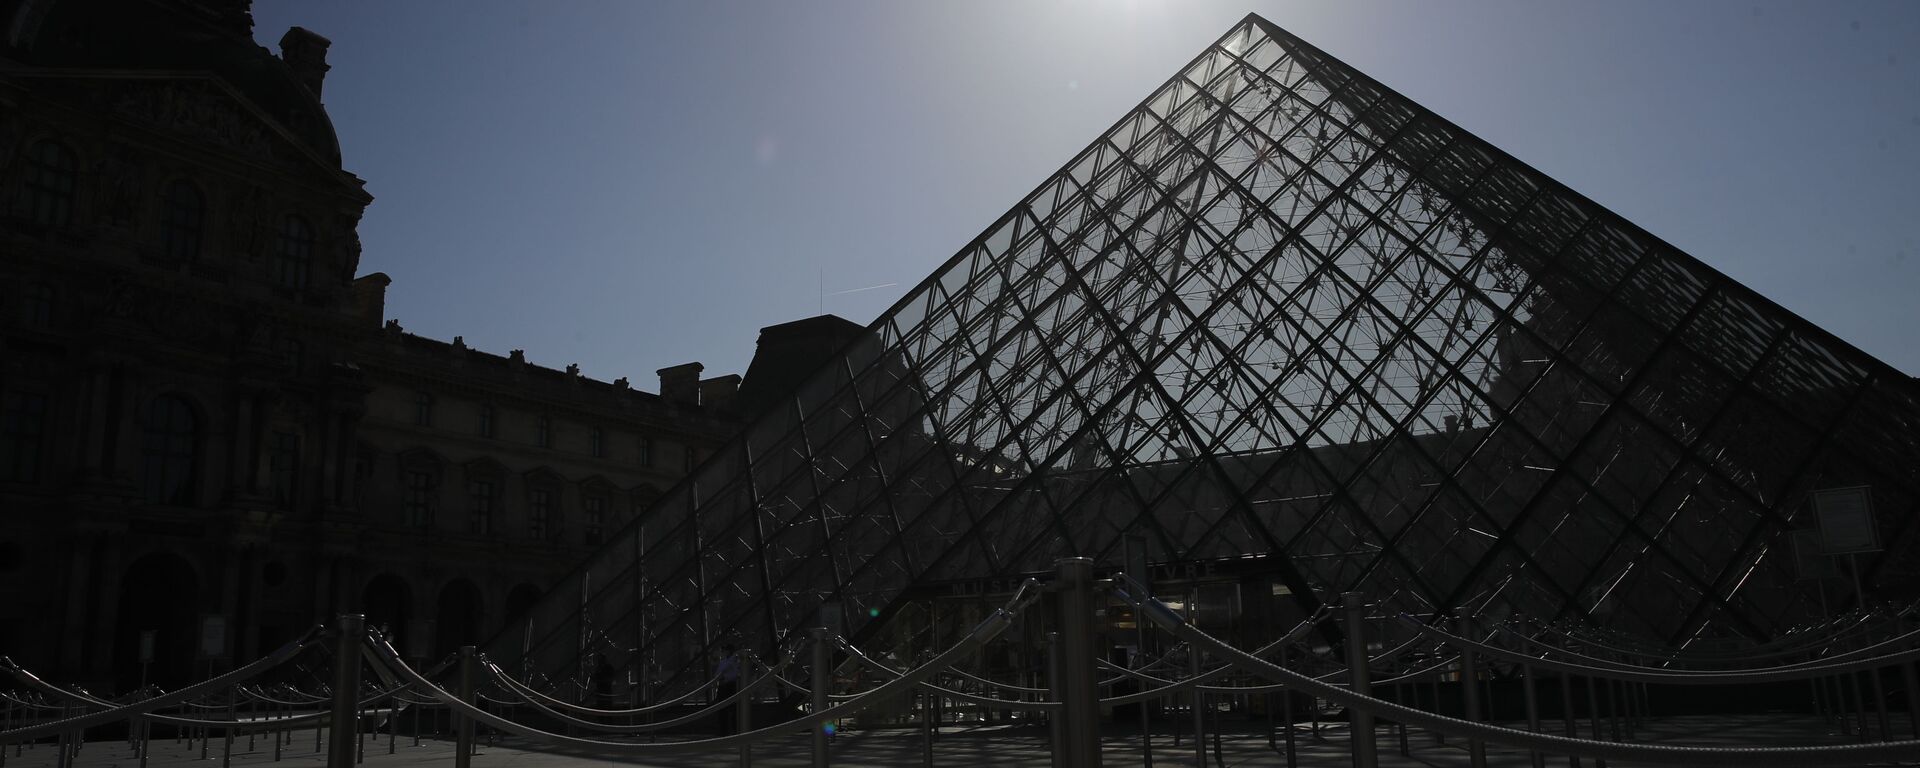 In this Tuesday, June 23, 2020 file photo, the pyramid of the Louvre museum is pictured before a visit ahead of its reopening next July 6, in Paris. The European Union announced Tuesday, June 30, 2020 that it will reopen its borders to travelers from 14 countries, but most Americans have been refused entry for at least another two weeks due to soaring coronavirus infections in the U.S.  - Sputnik International, 1920, 31.07.2020